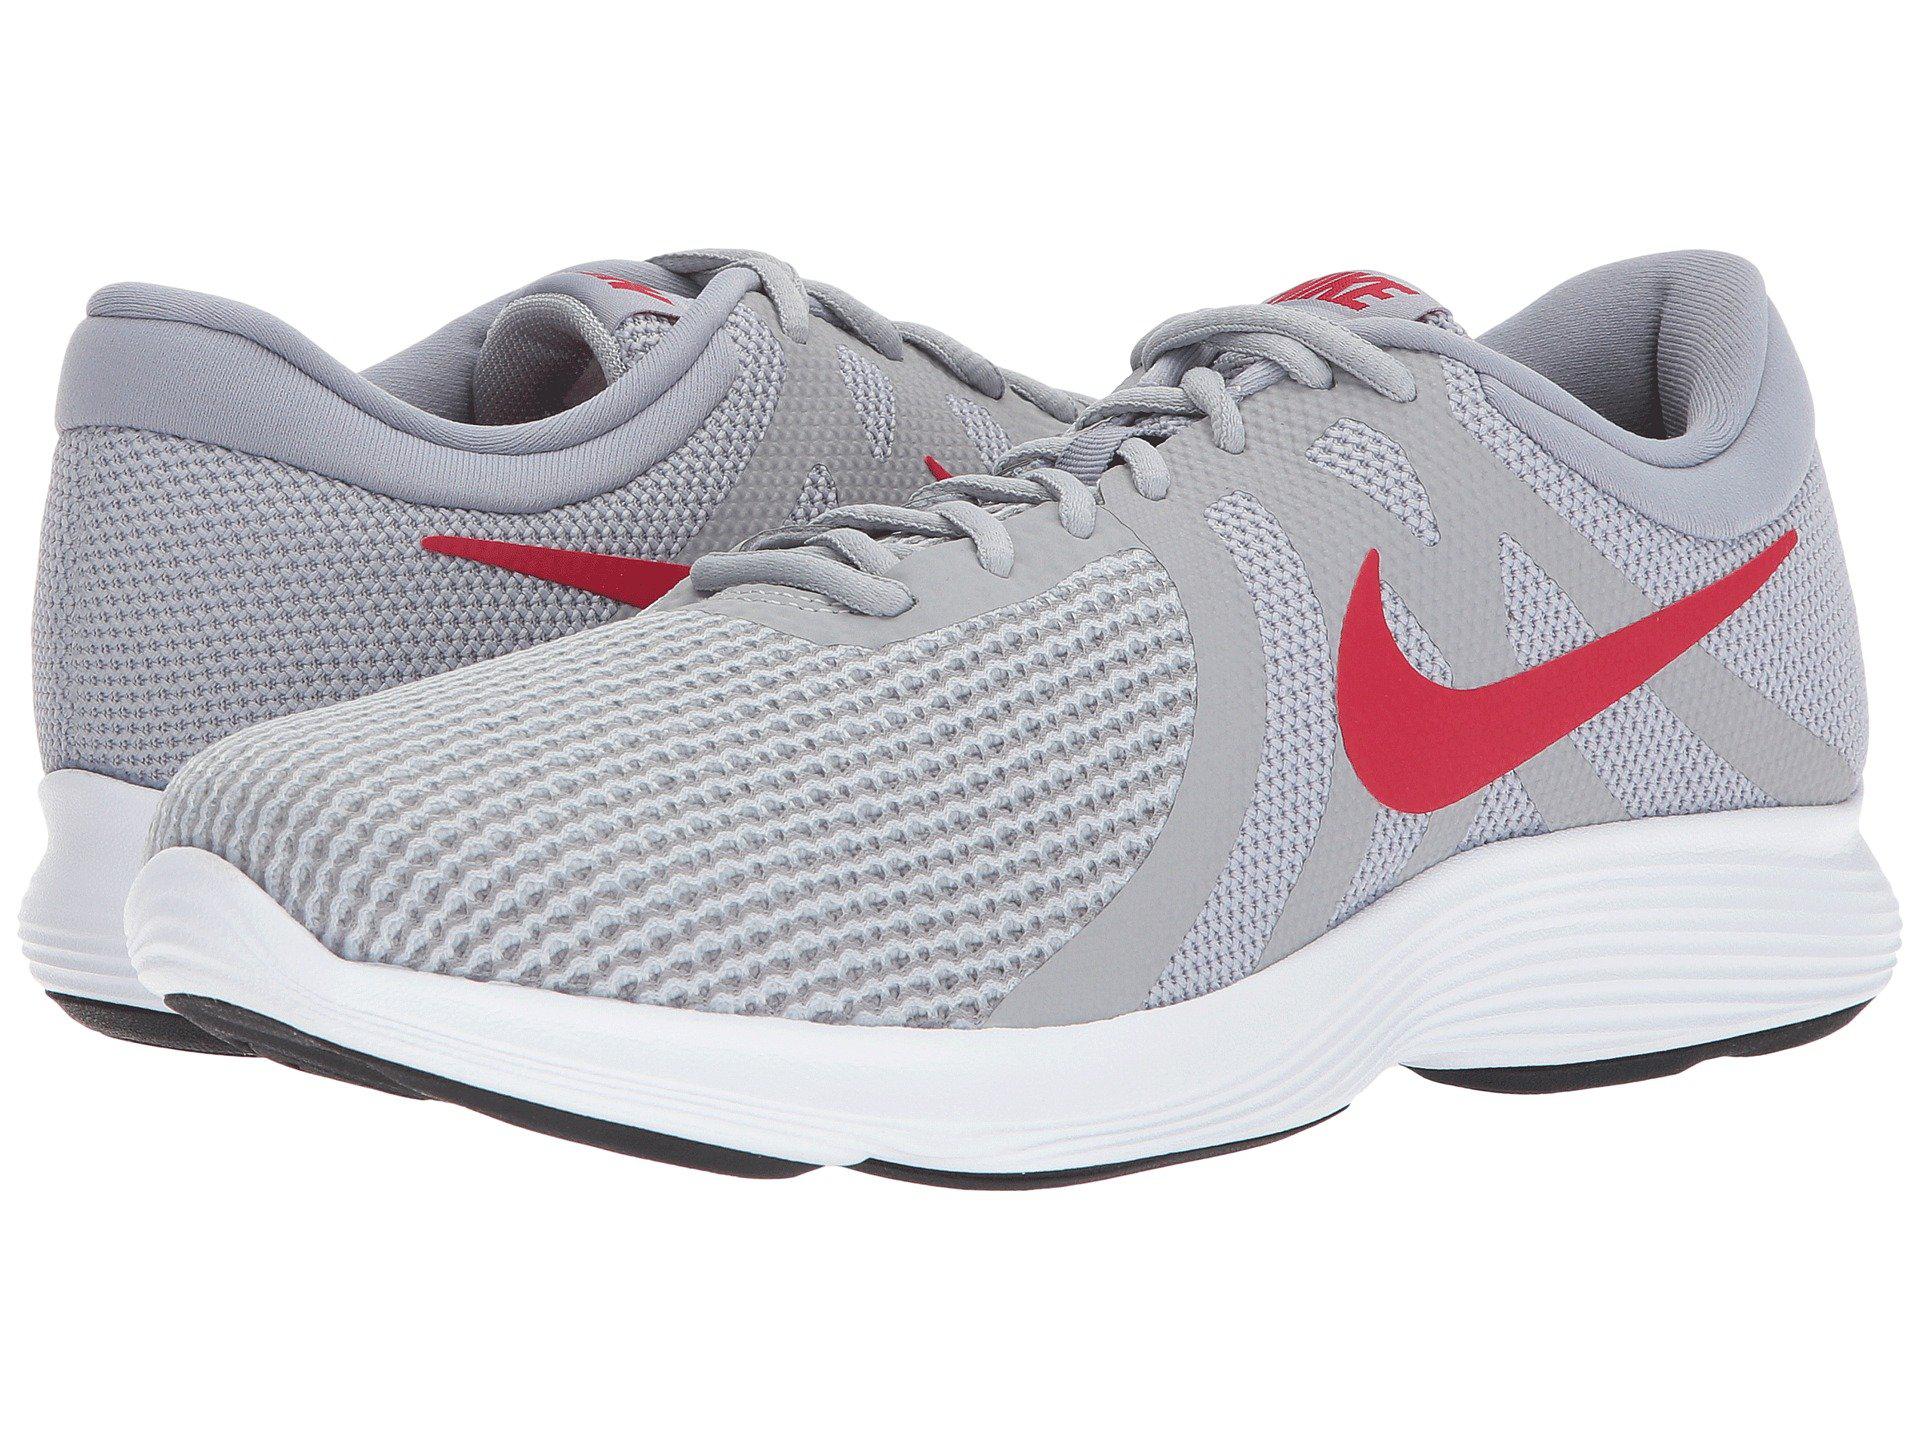 Nike Rubber Revolution 4 Running Shoe, Wolf Grey/gym Red-stealth, 9.5 4e Us  in Gray for Men - Lyst